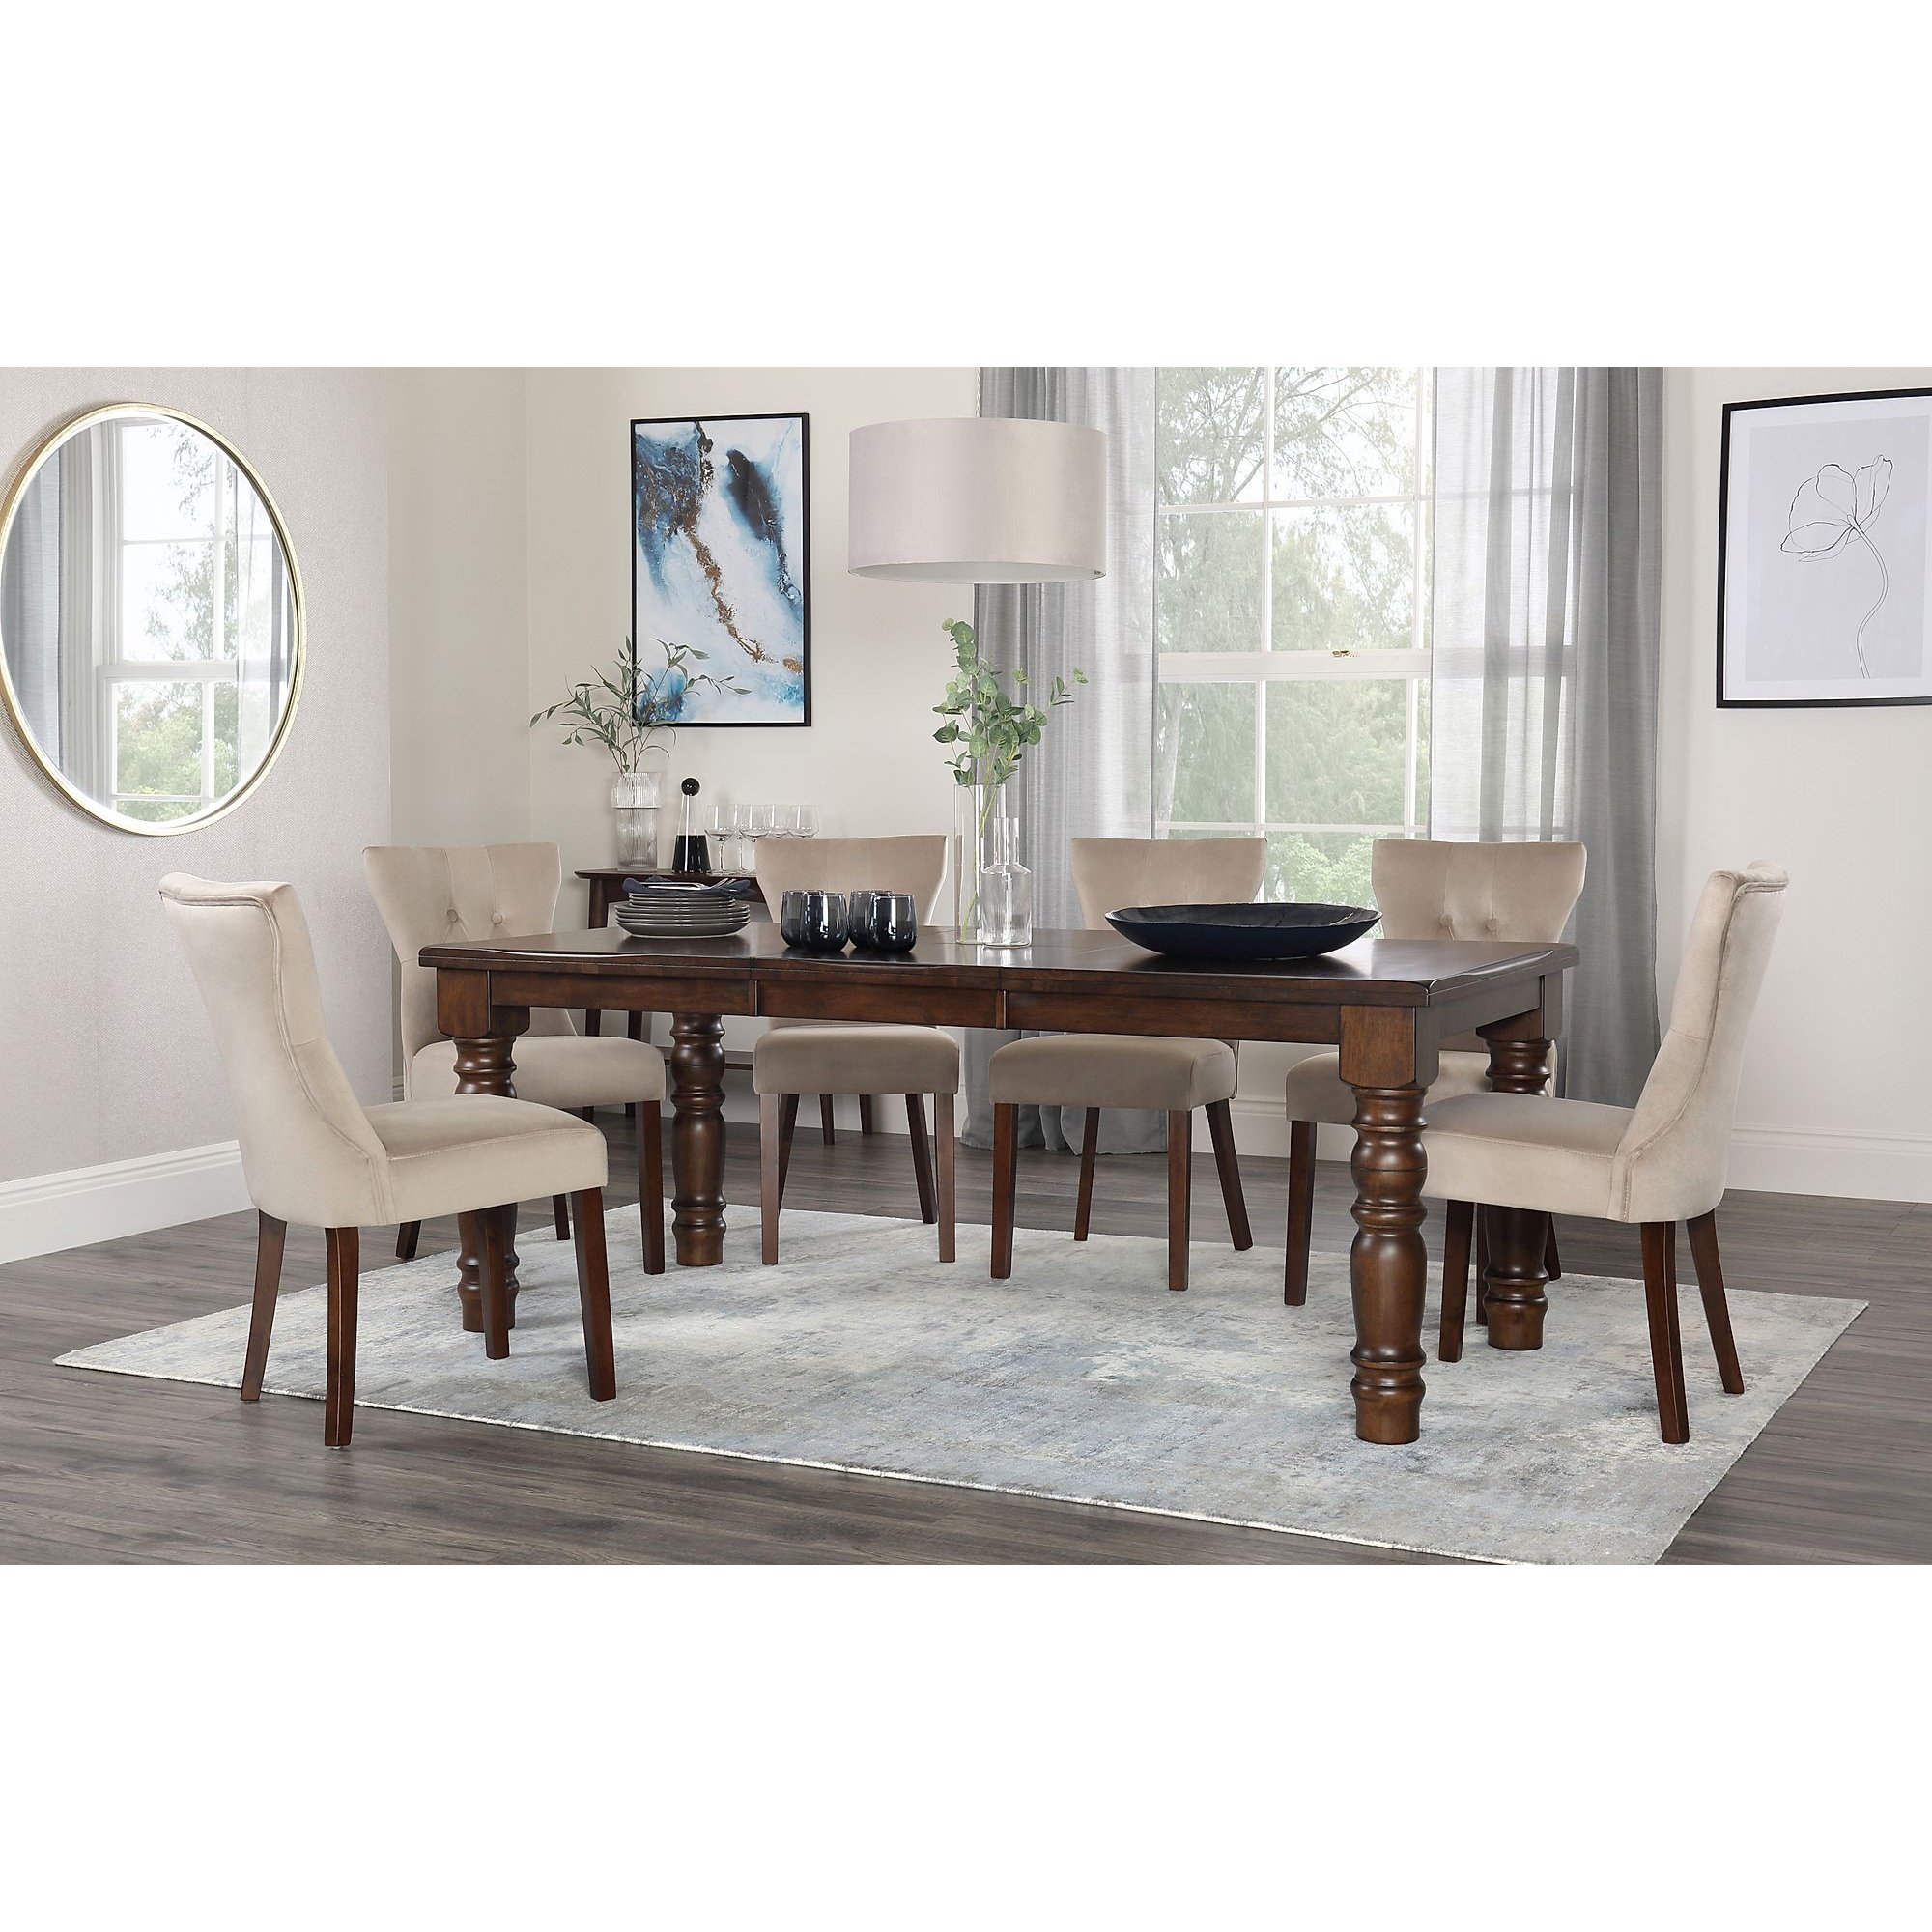 Hampshire Dark Wood Extending Dining Table with 4 Bewley Mink Velvet Chairs